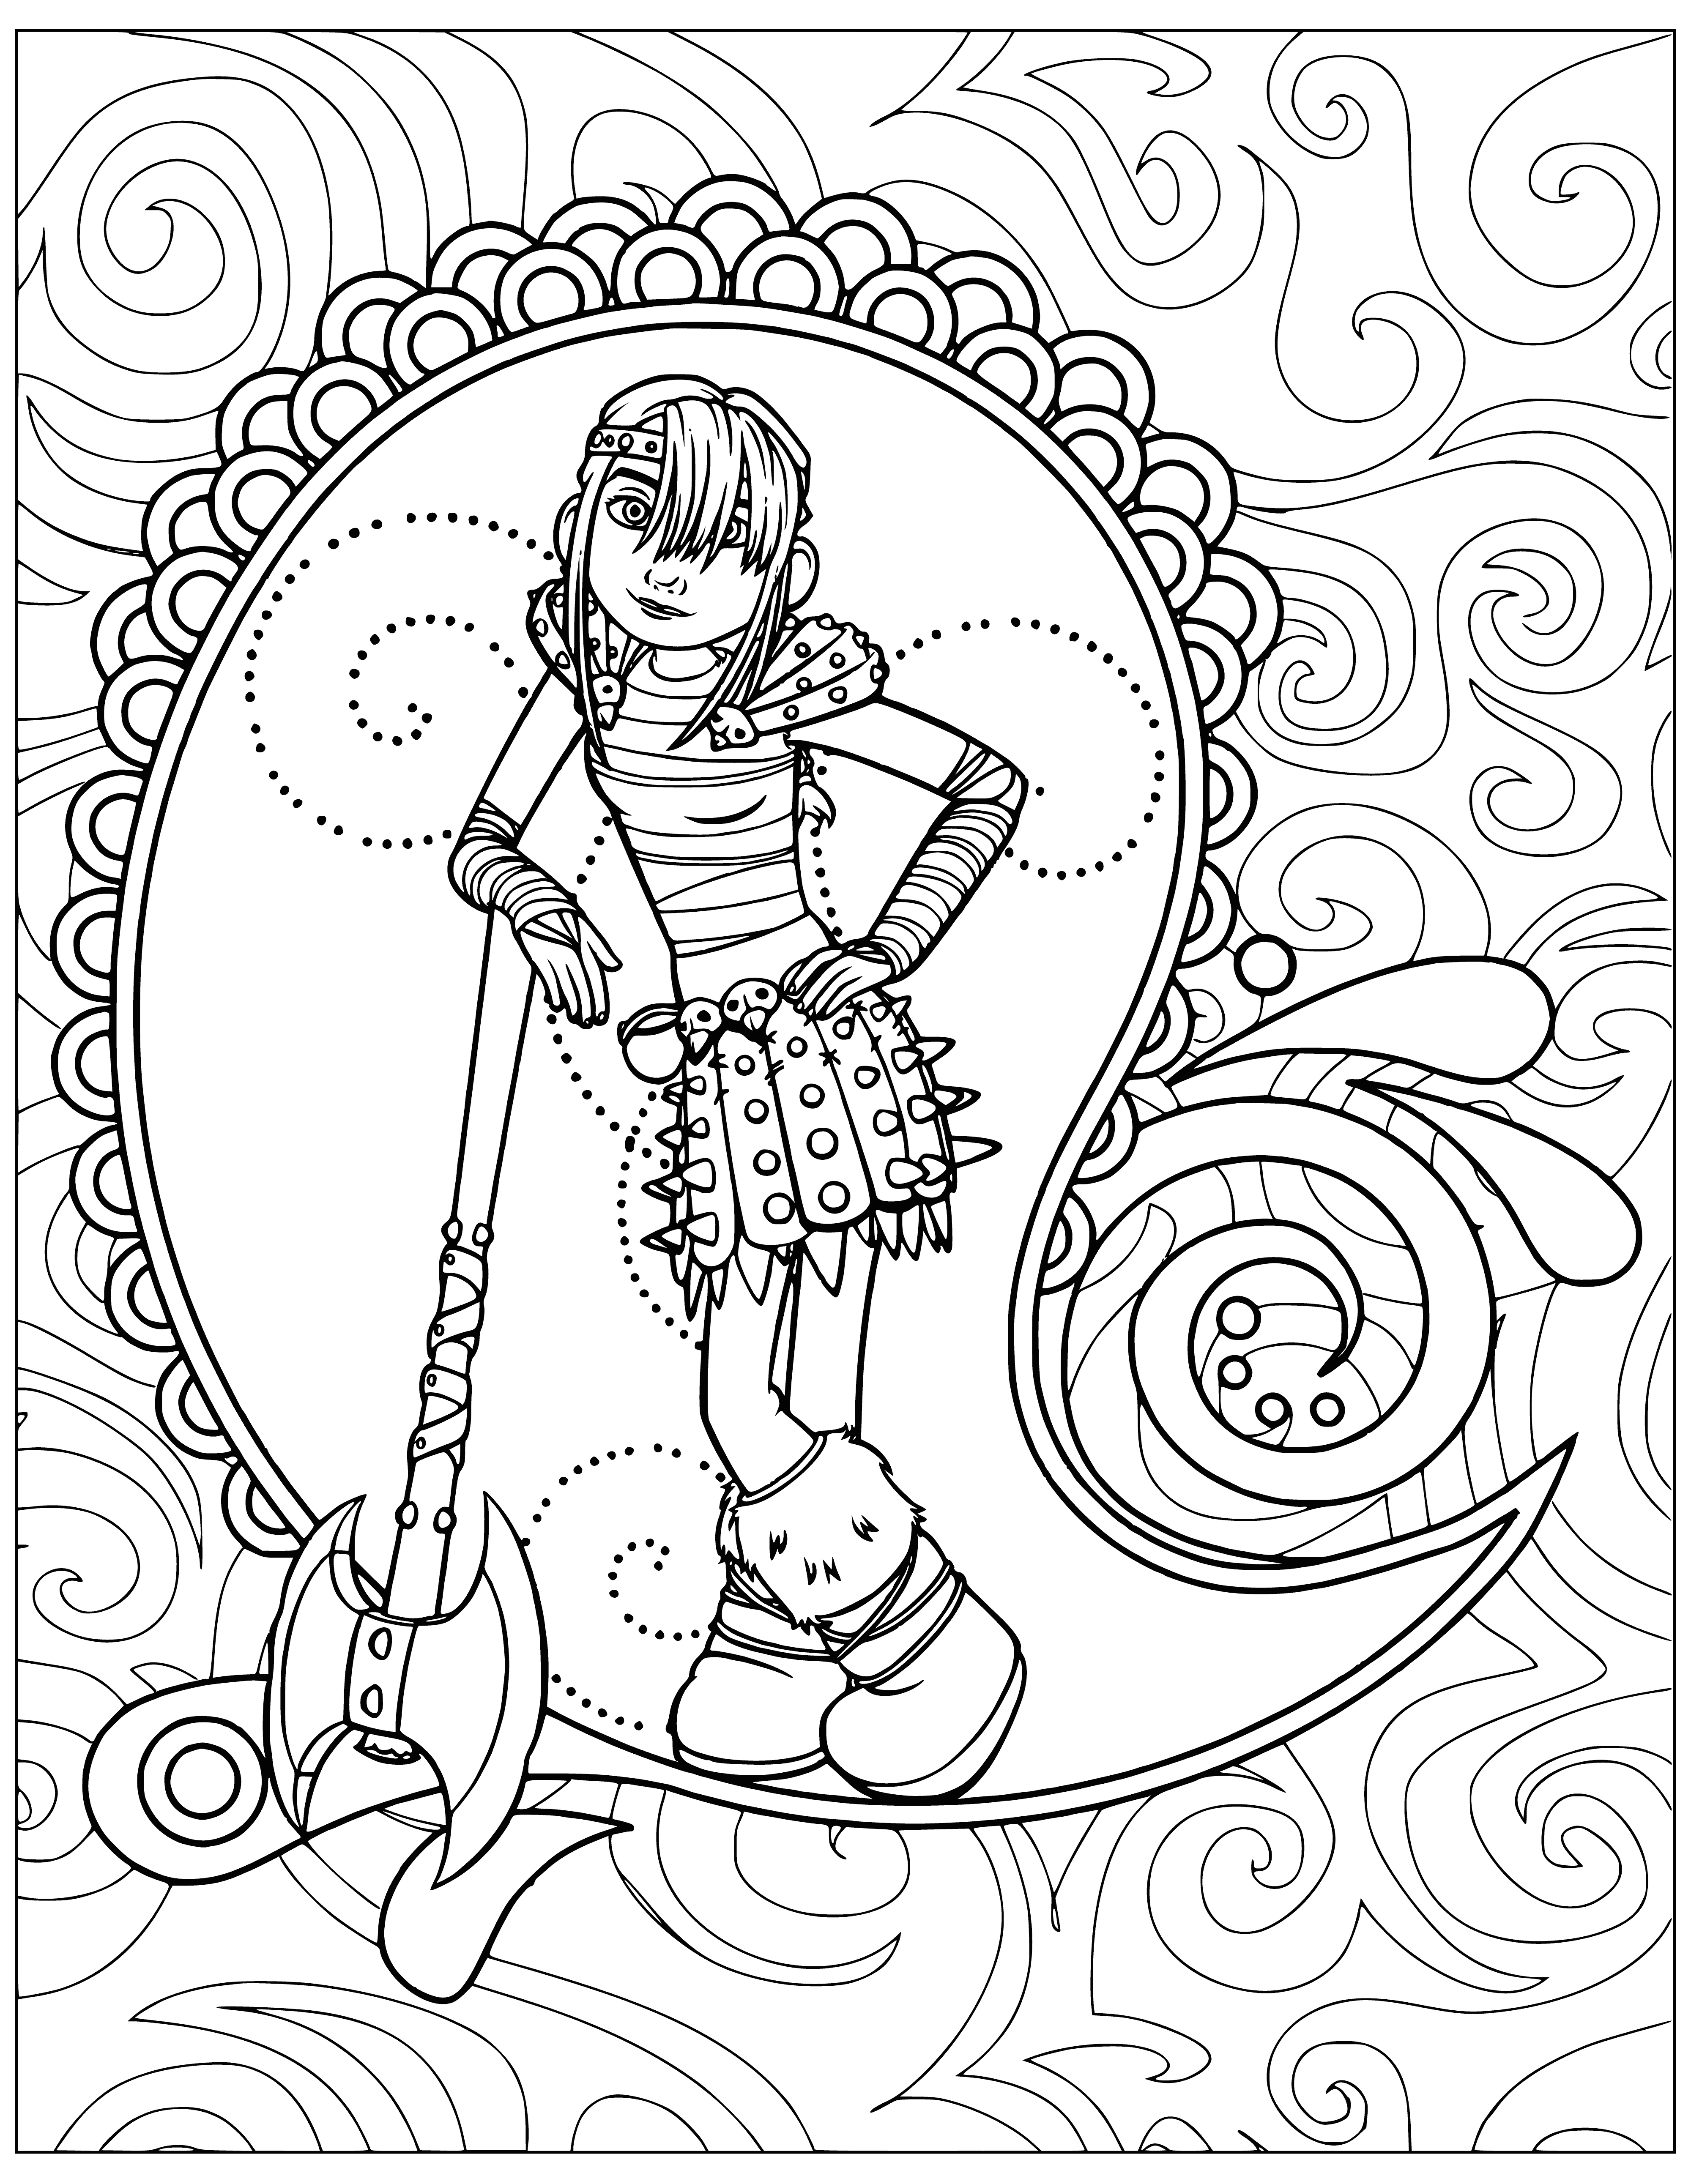 coloring page: Young girl on cliff with spear & giant dragon. She wears fur cape, green tunic, & dark leggings. Dragon has green scales & large wings, eyes closed and peaceful.